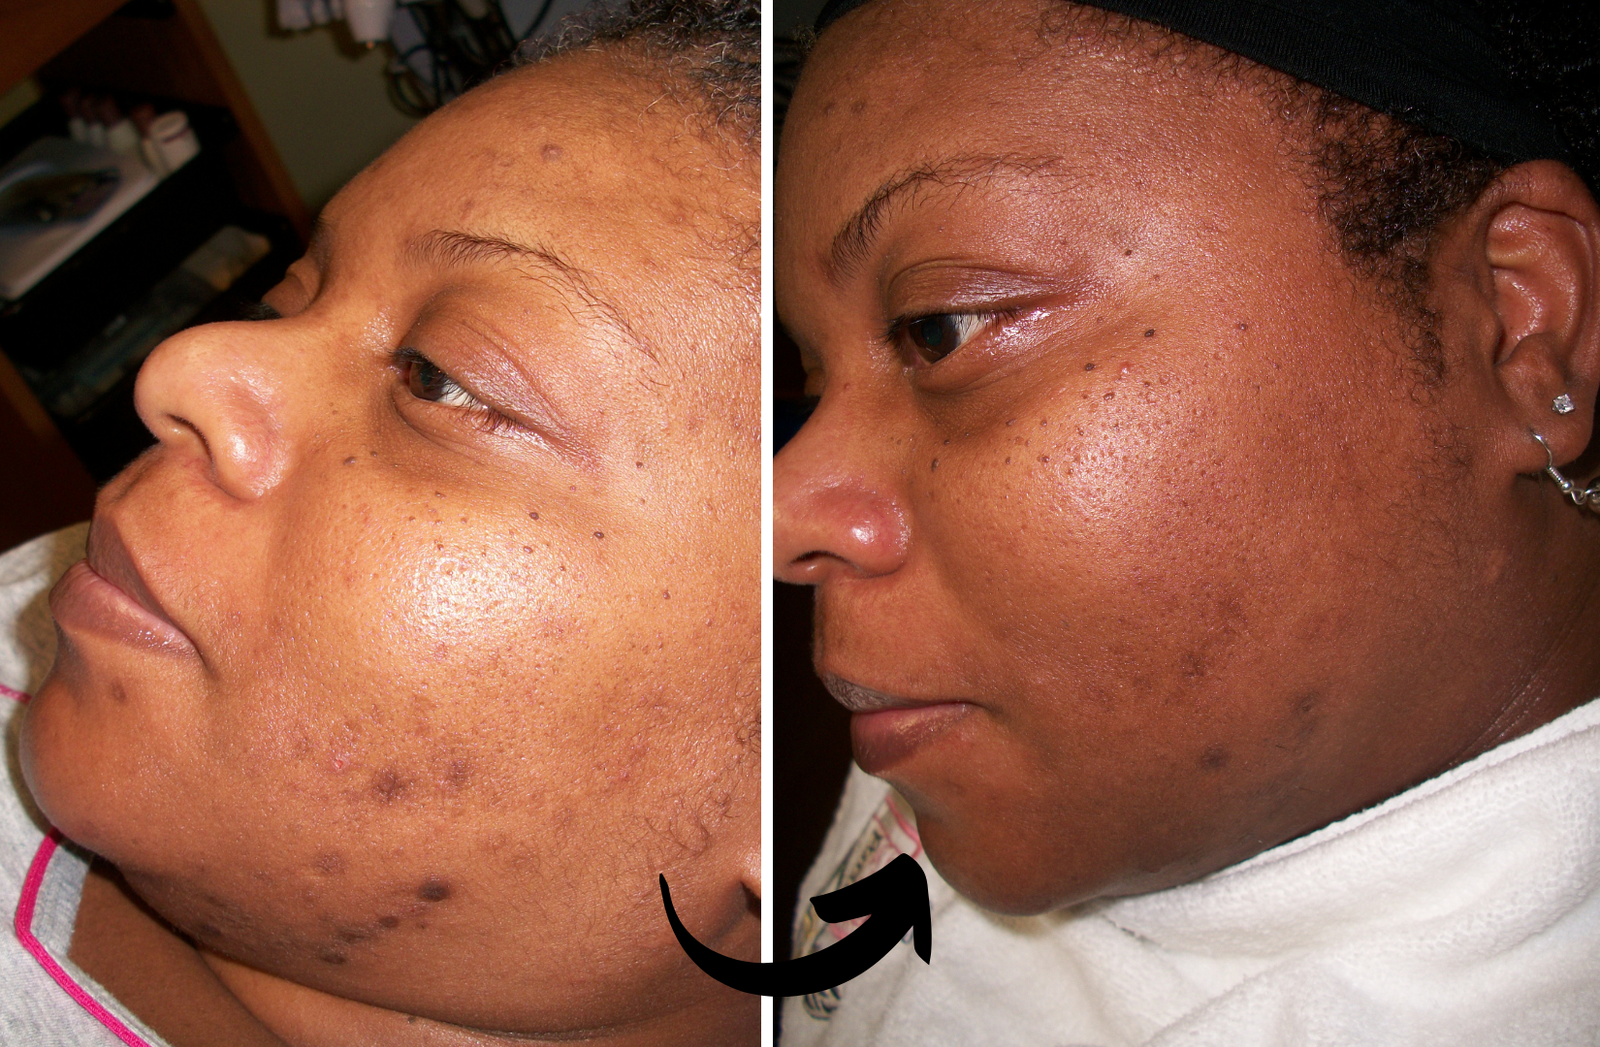 before and after dark spot treatment-- corrective skincare treatment solution Why Choose Xubian Acne Clinic? Read real life acne treatment and corrective skincare testimonials, reviews and client stories of Xubian Wellness & Acne Clinic